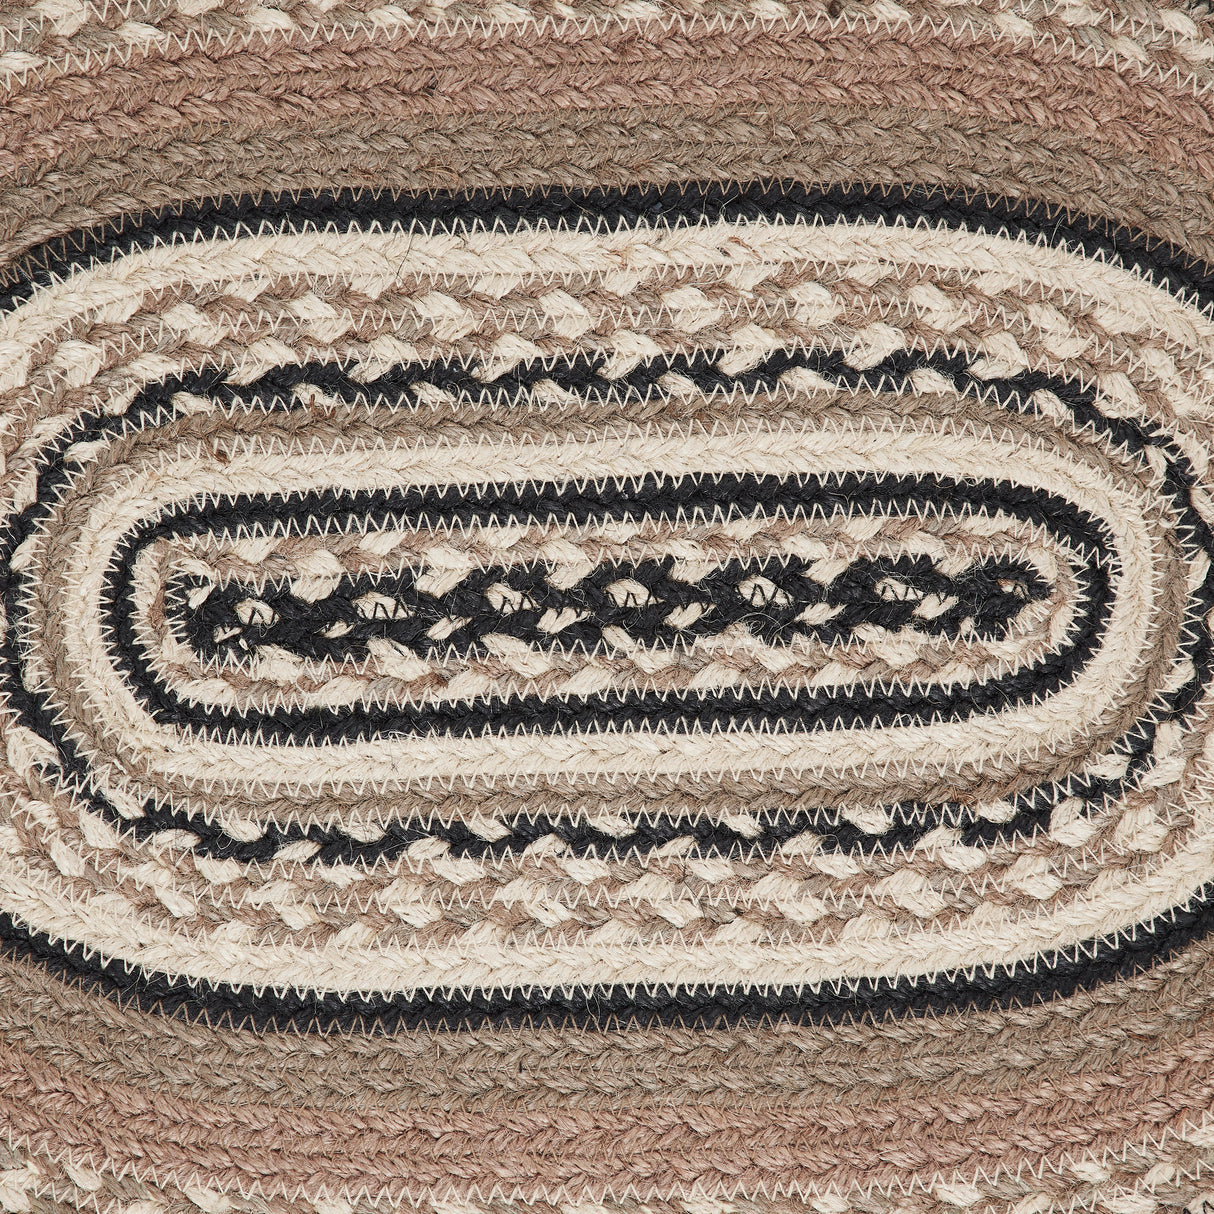 81447-Sawyer-Mill-Charcoal-Creme-Jute-Oval-Placemat-10x15-image-3